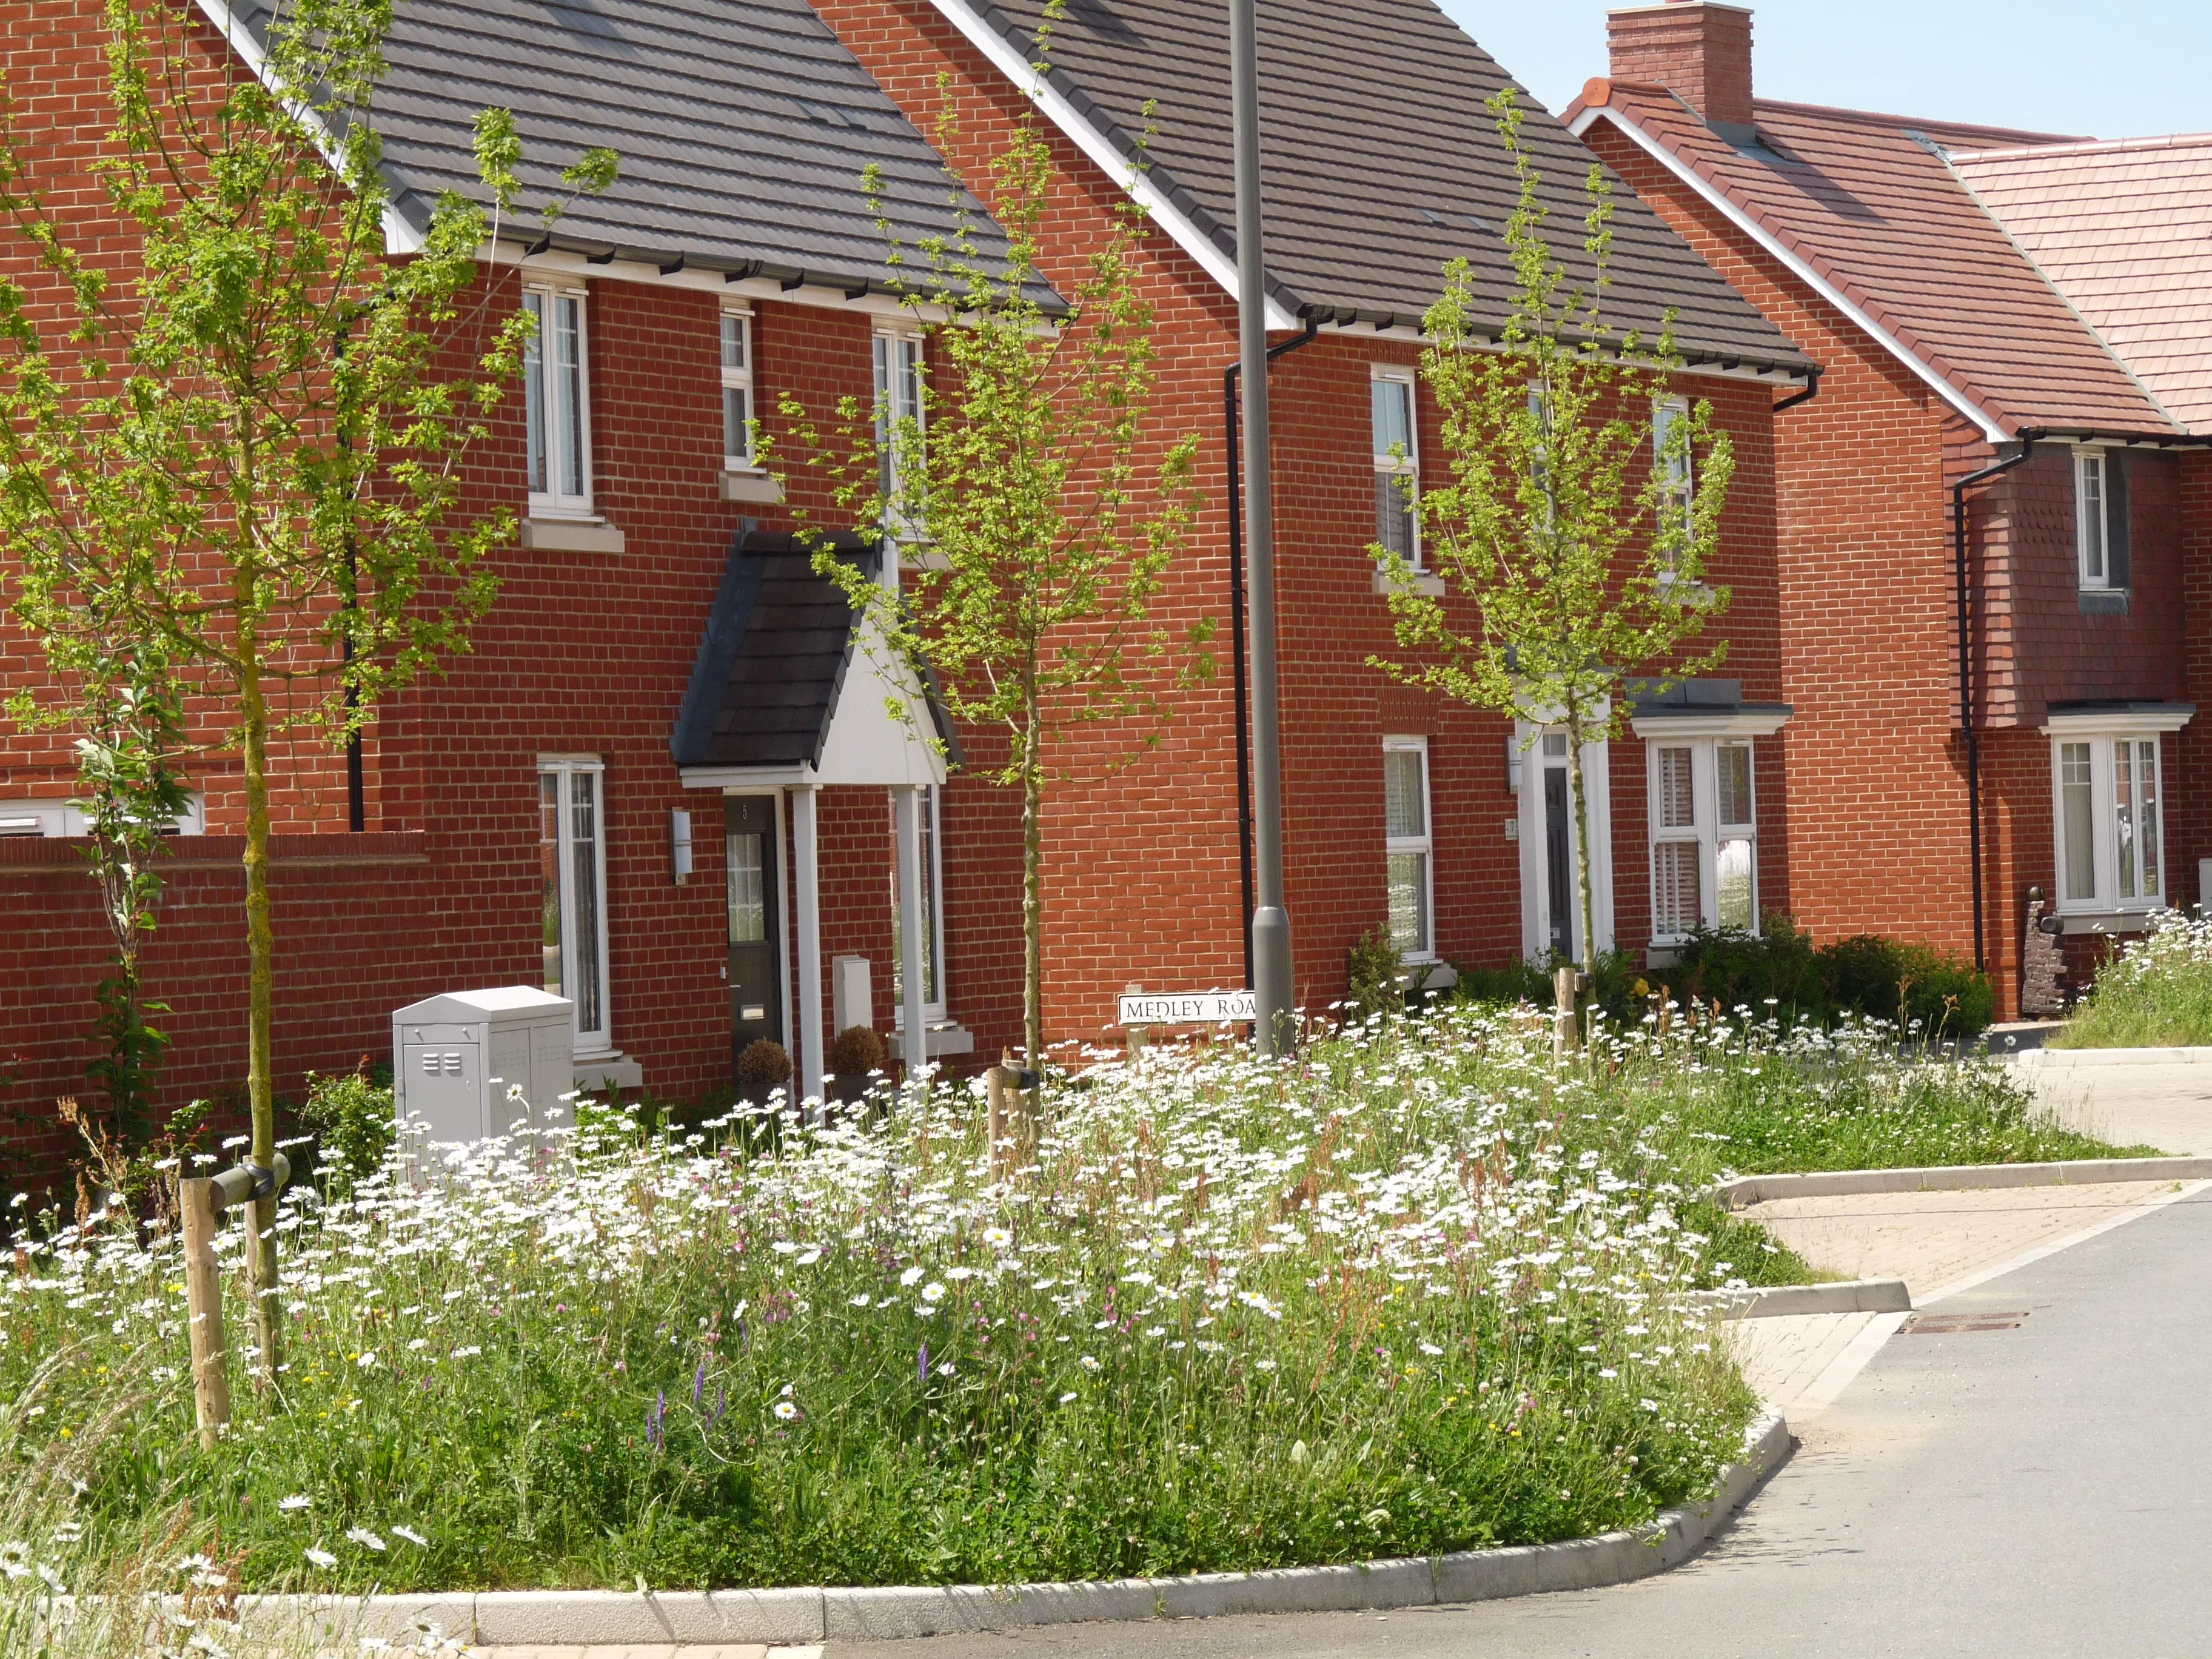 Kingsbrook homes with wildflower verges on the street.